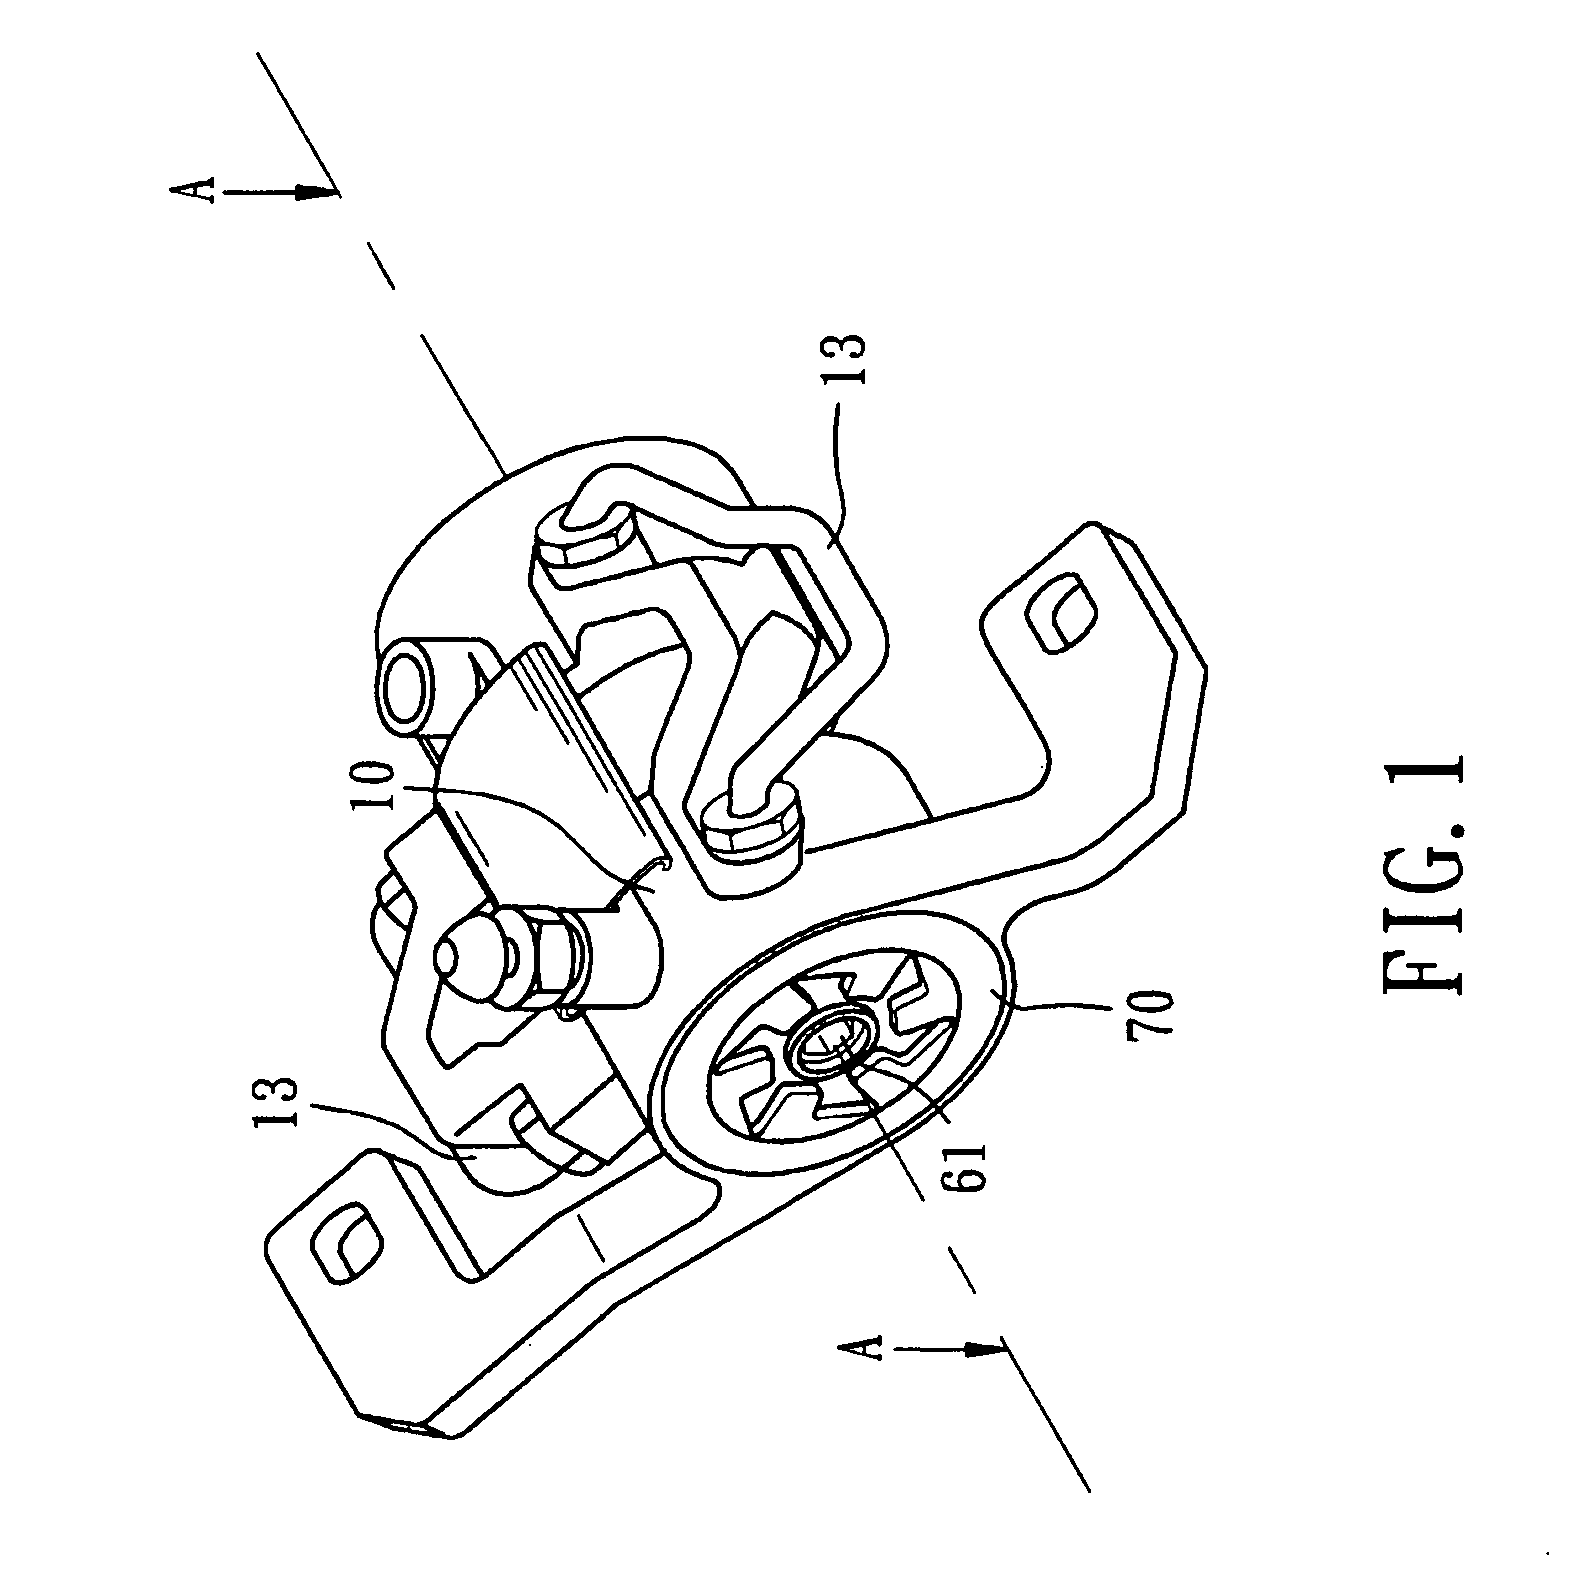 Hydraulic caliper brake assembly for a bicycle